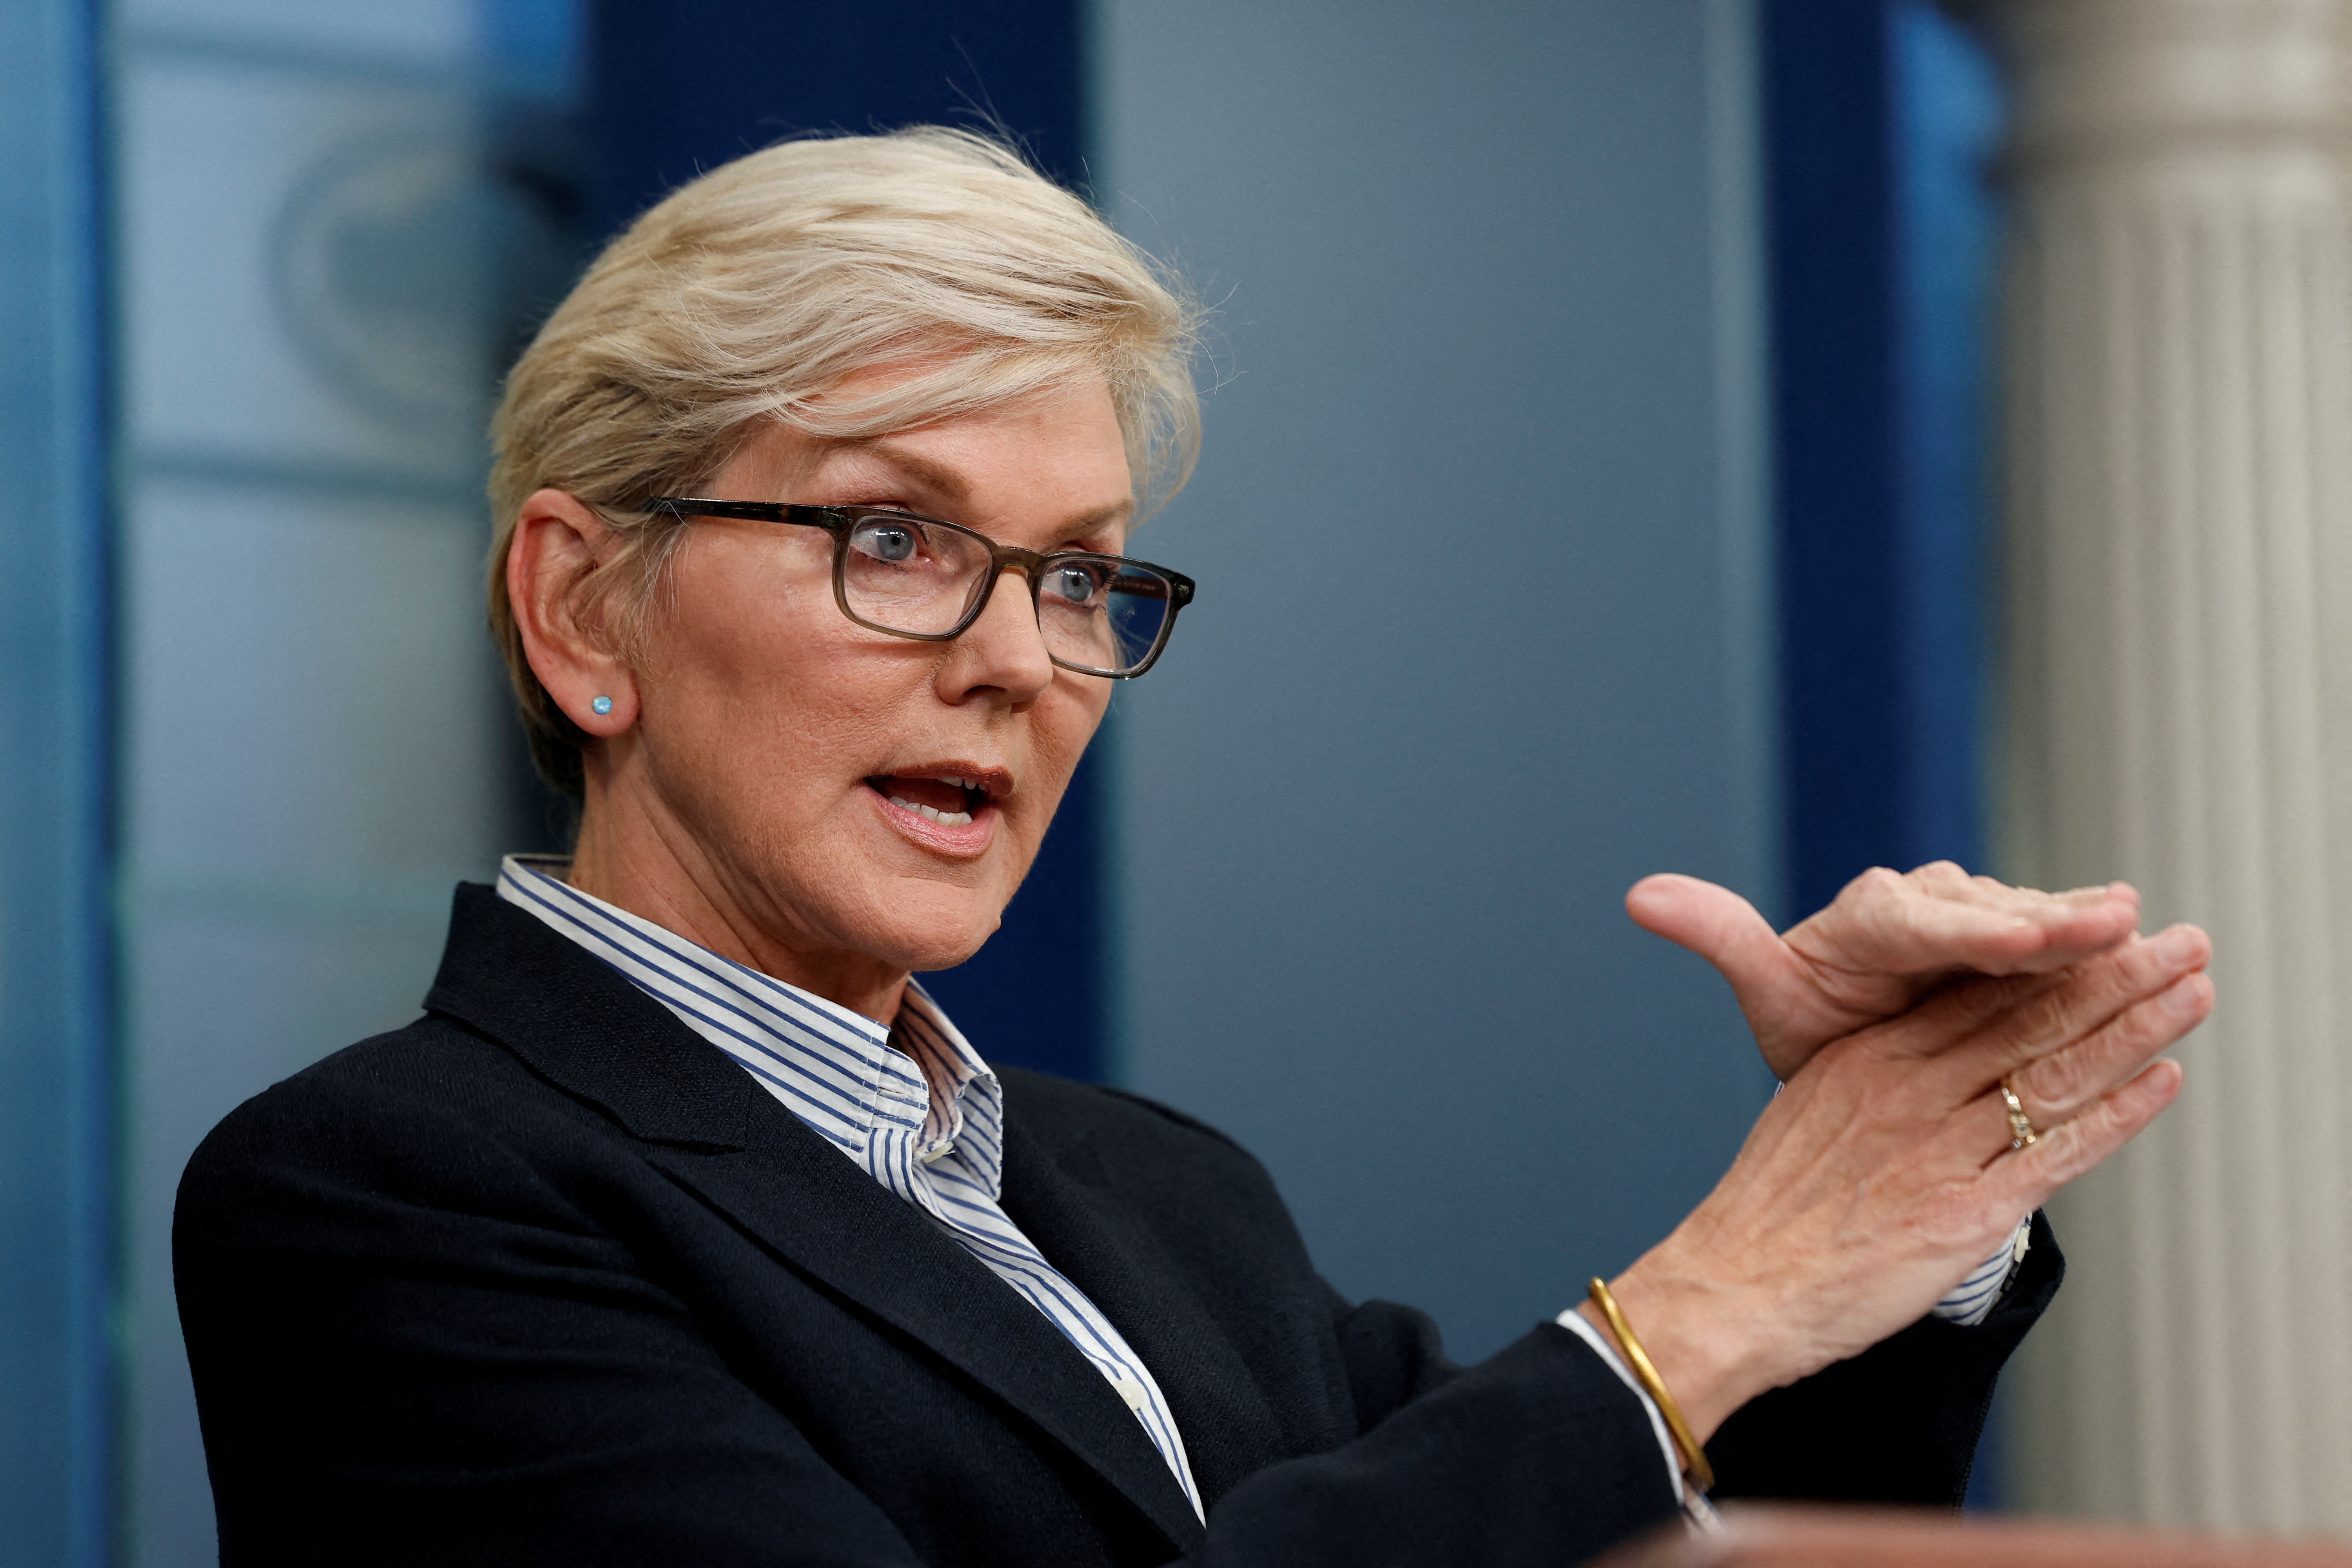 &copy; Reuters. FILE PHOTO: U.S. Secretary of Energy Jennifer Granholm attends the White House daily press briefing, in Washington, U.S., January 23, 2023. REUTERS/Evelyn Hockstein/File Photo